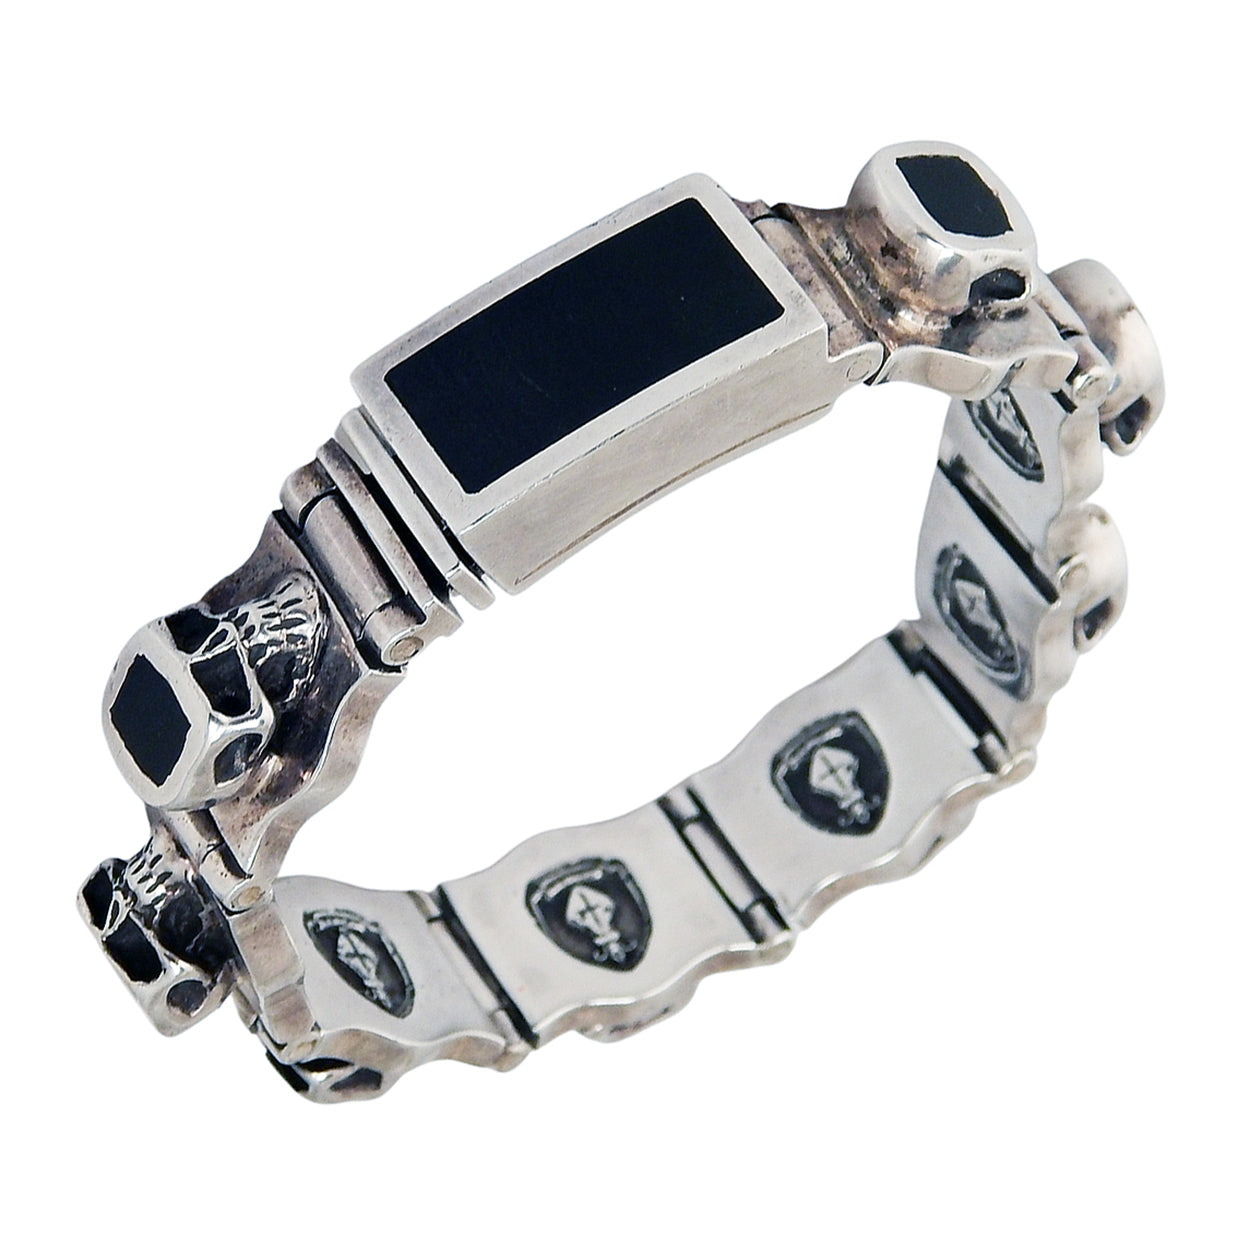 MARCOS - &quot;SKULL&quot; Limited Edition Bracelet in Sterling Silver and Ebony Wood